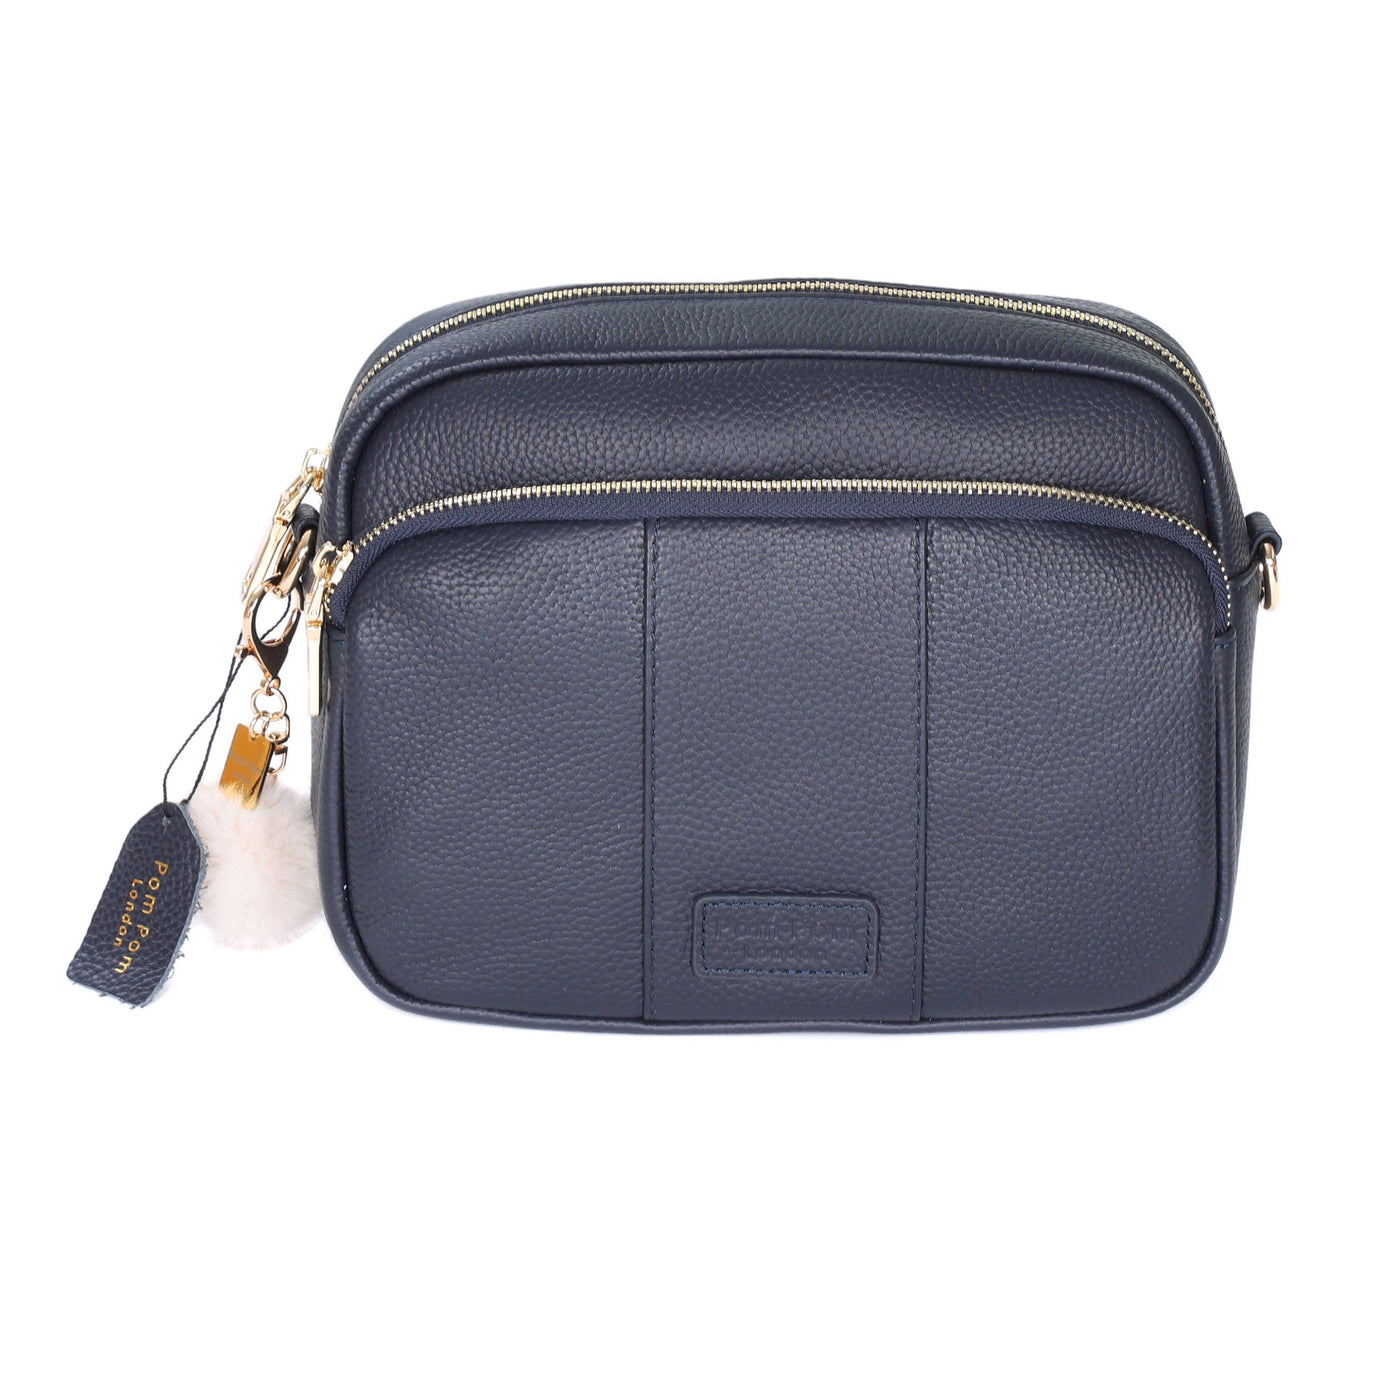 East/West Mini - Leather/Suede Navy with Grey Stitch